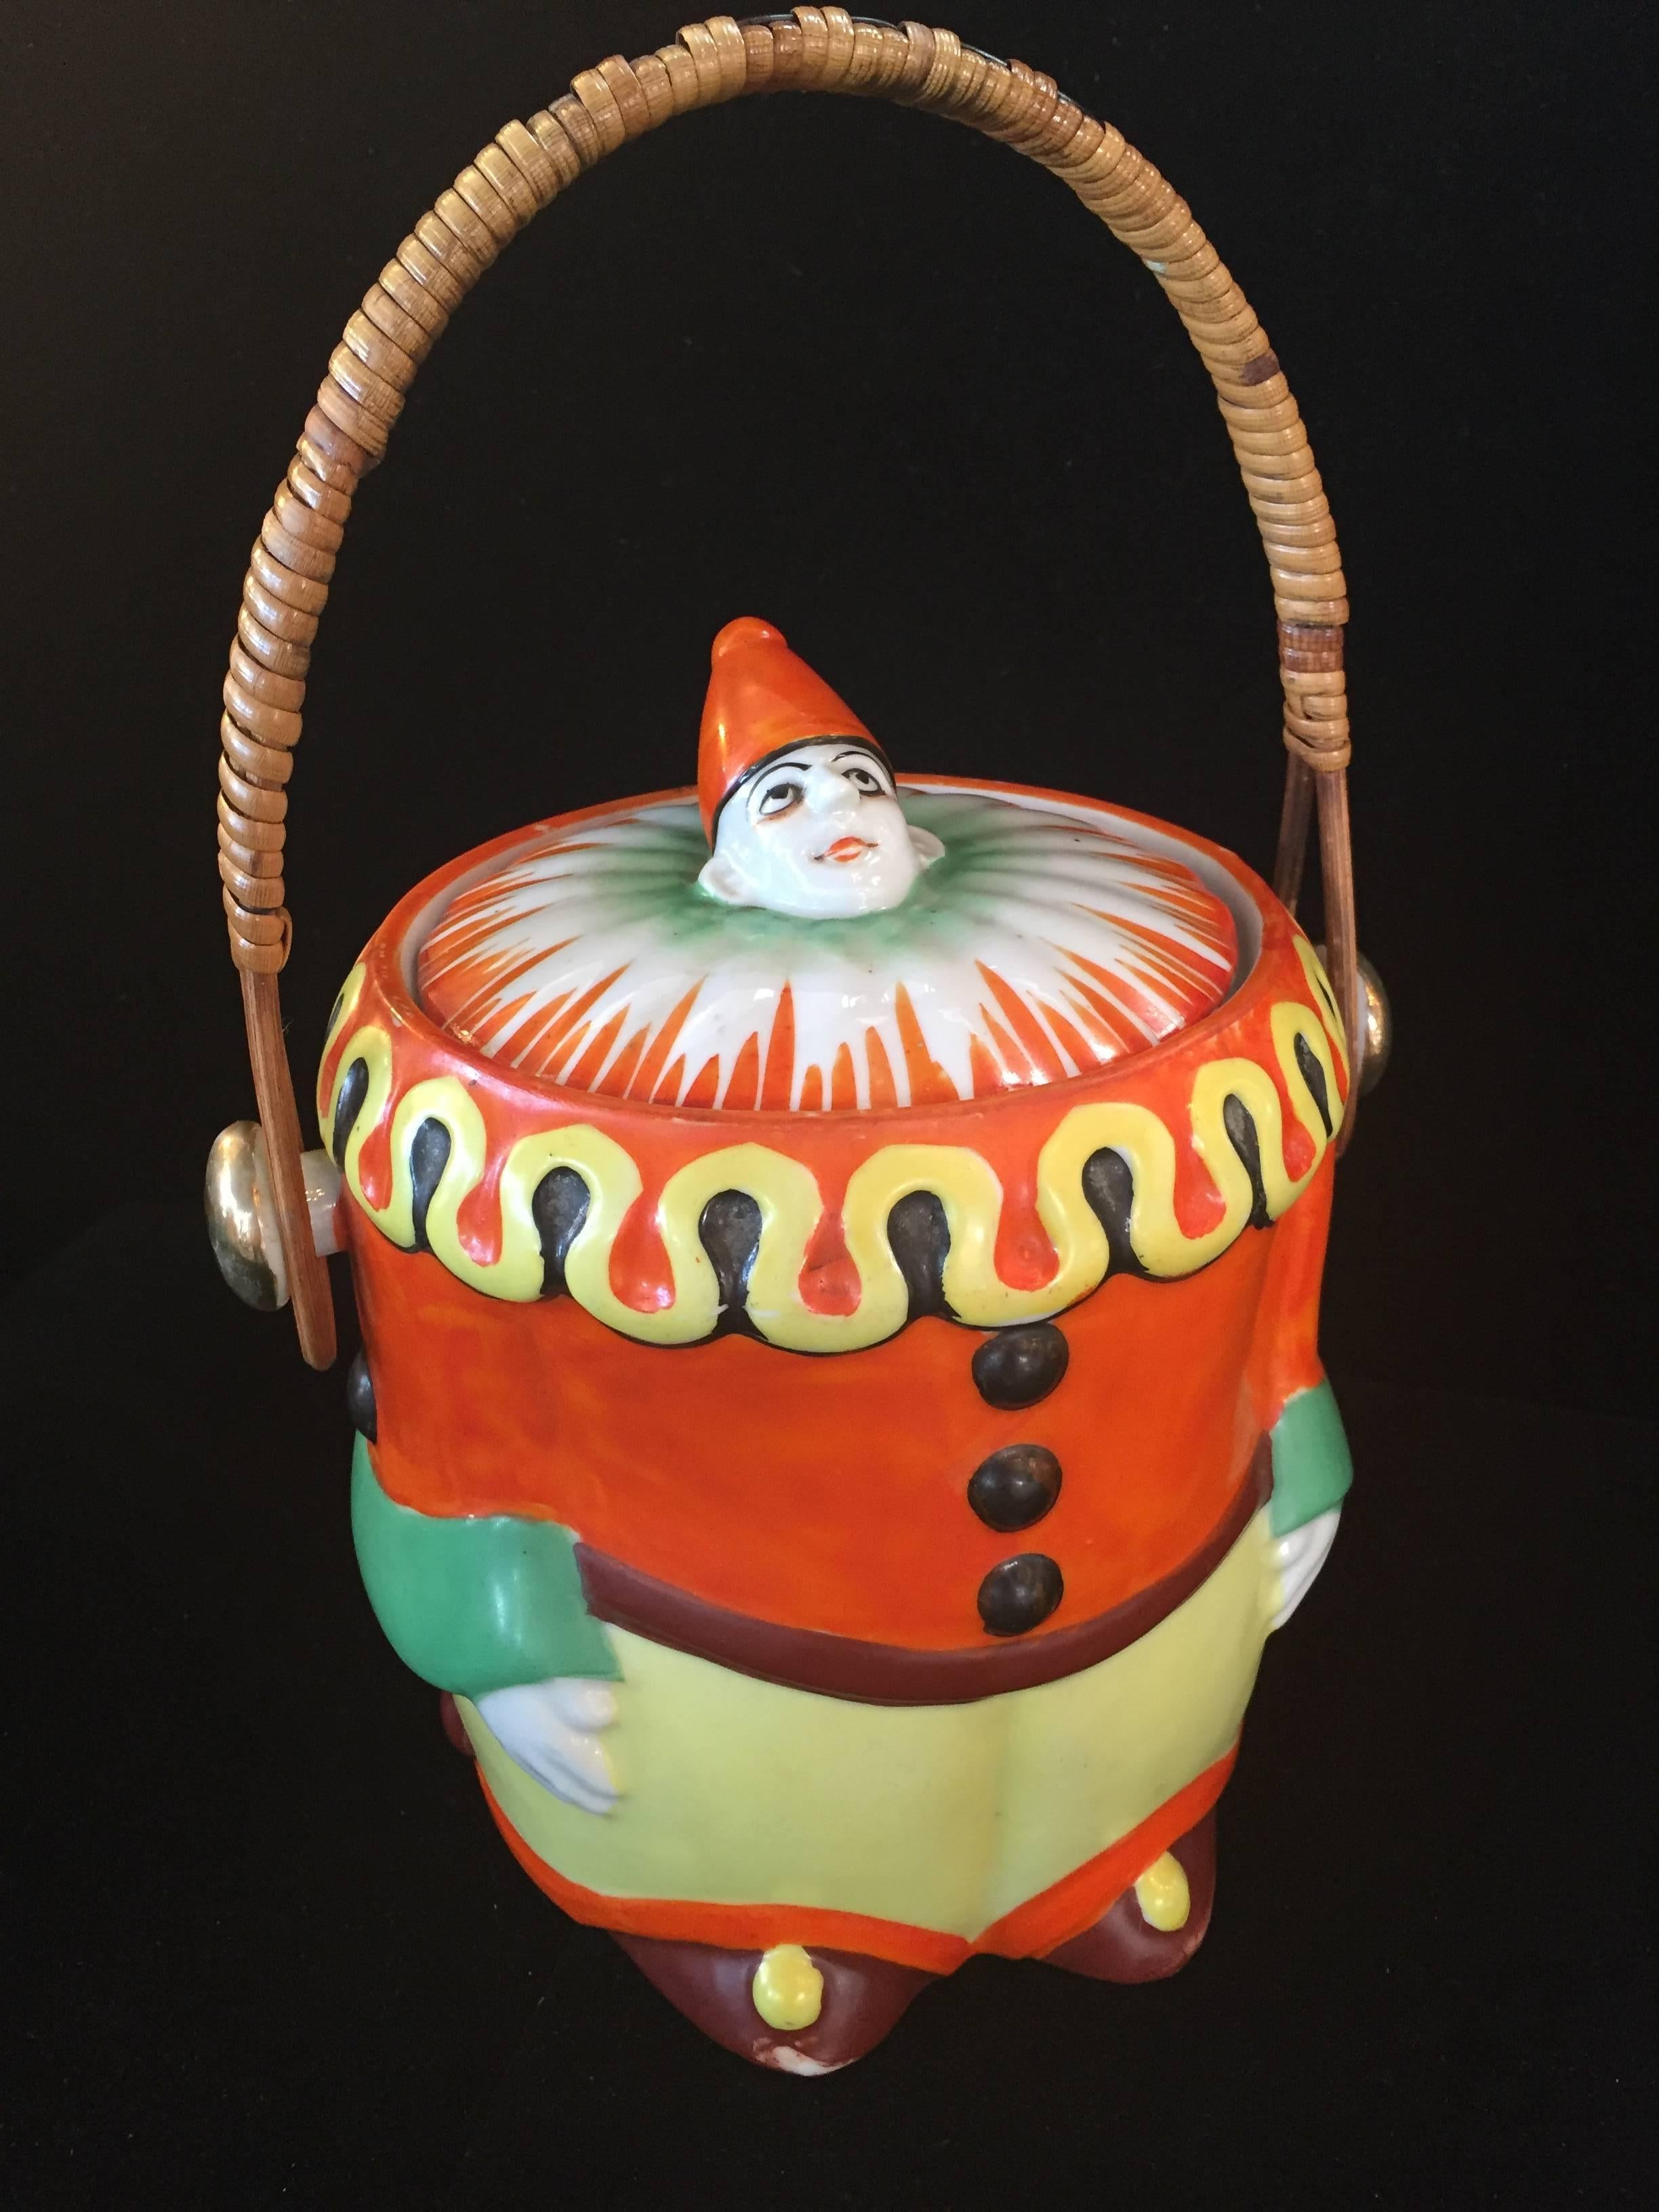 Art Deco hand-painted Pierrot cookie jar biscuit jar, stamped made in Japan, with bamboo wicker handle and gold leaf. Beautiful detail, vibrant orange black yellow green.